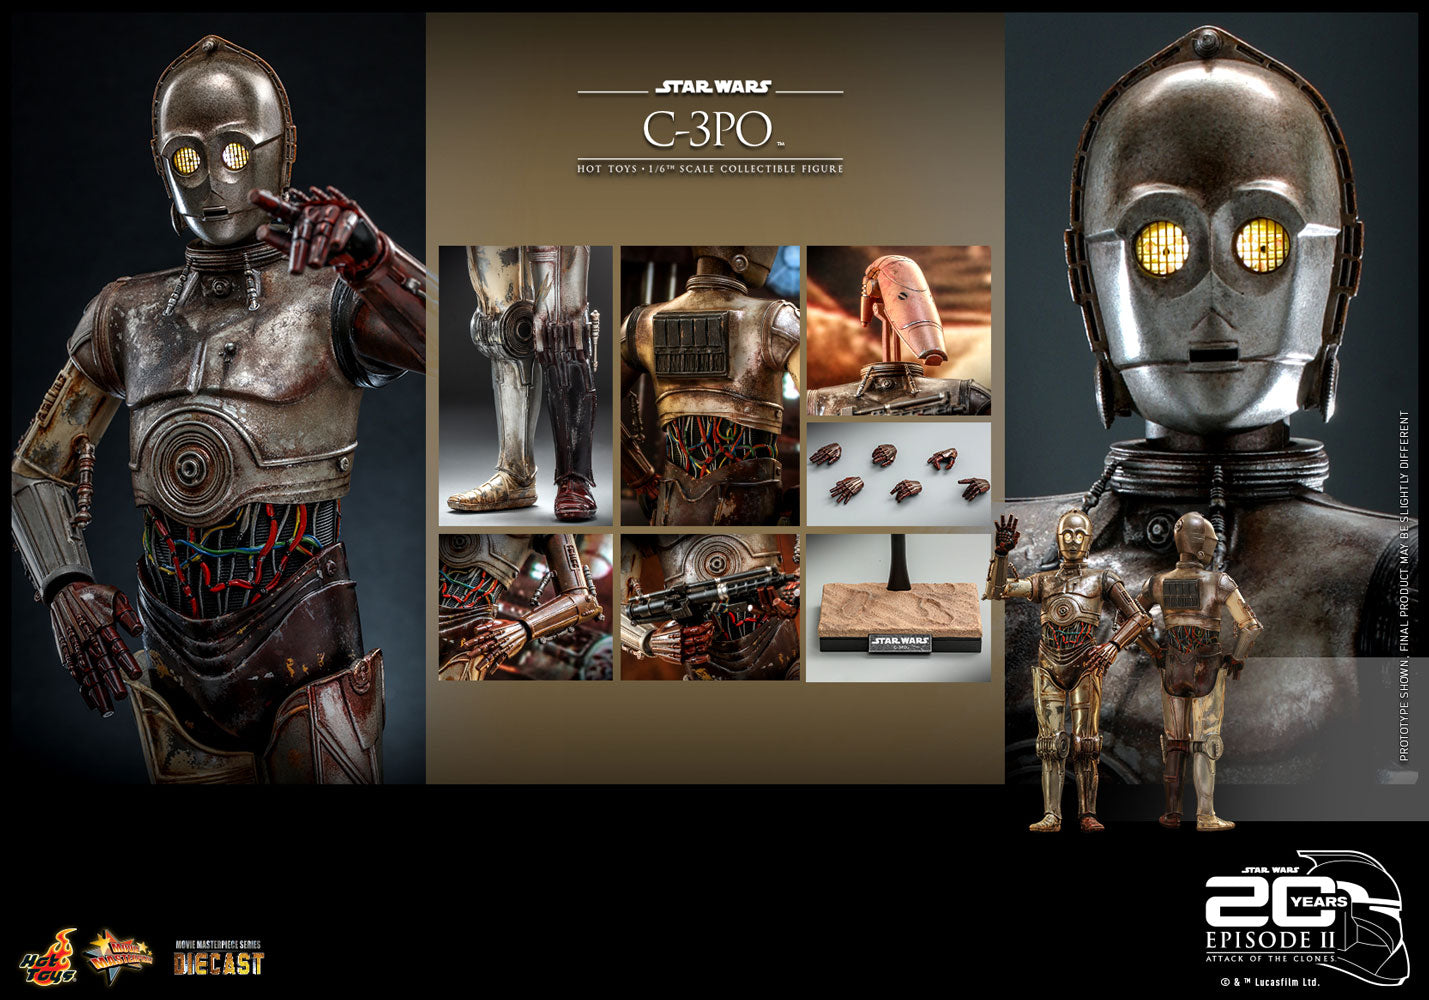 C-3PO Sixth Scale Figure by Hot Toys